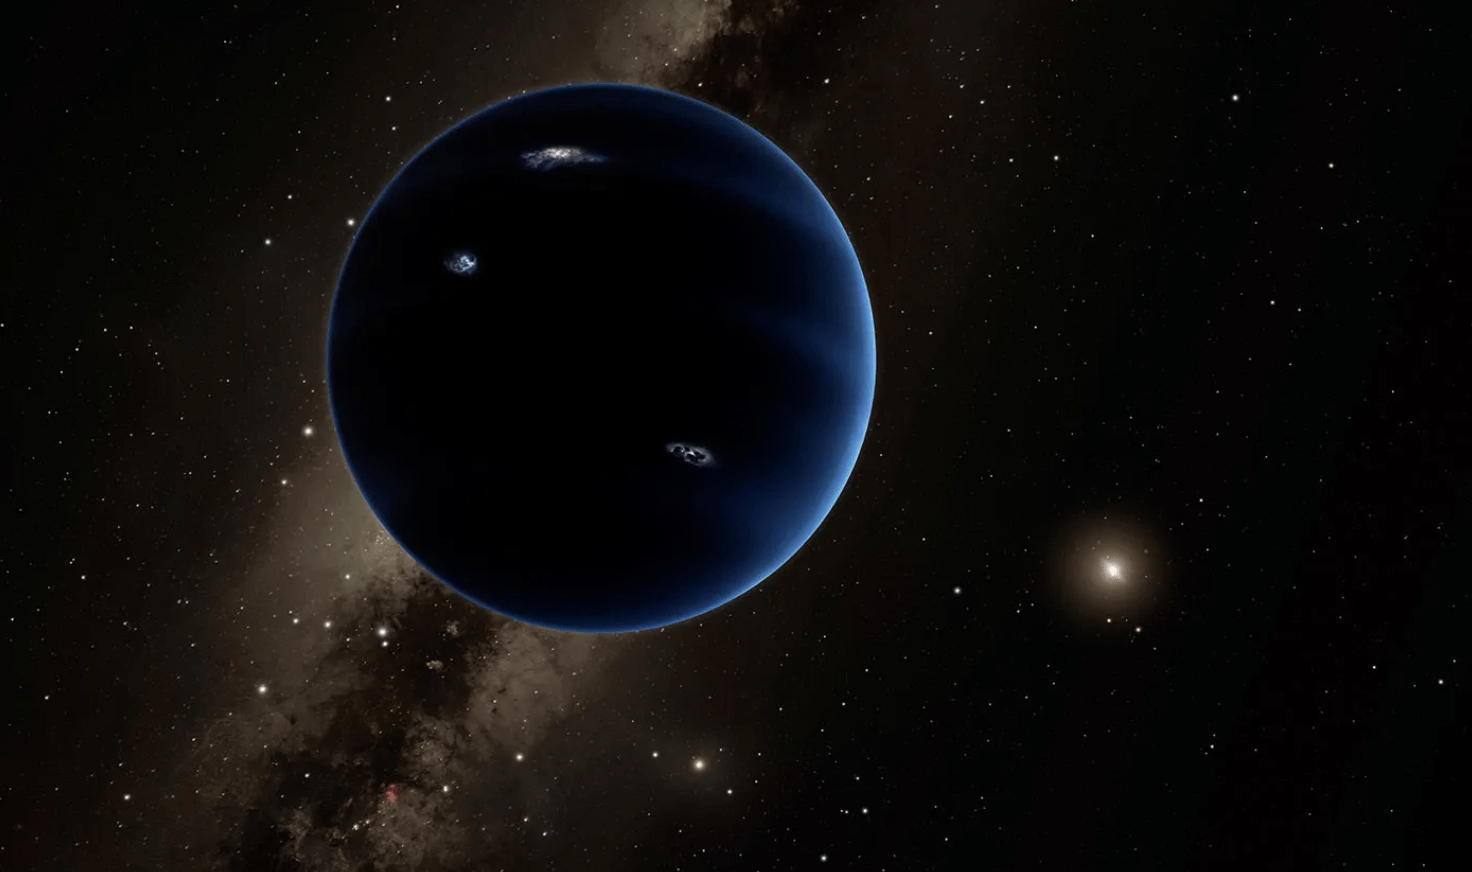 Study Suggests That the Elusive Planet Nine Might Actually Be an Alternative Expression of Gravity Posing as a Planet